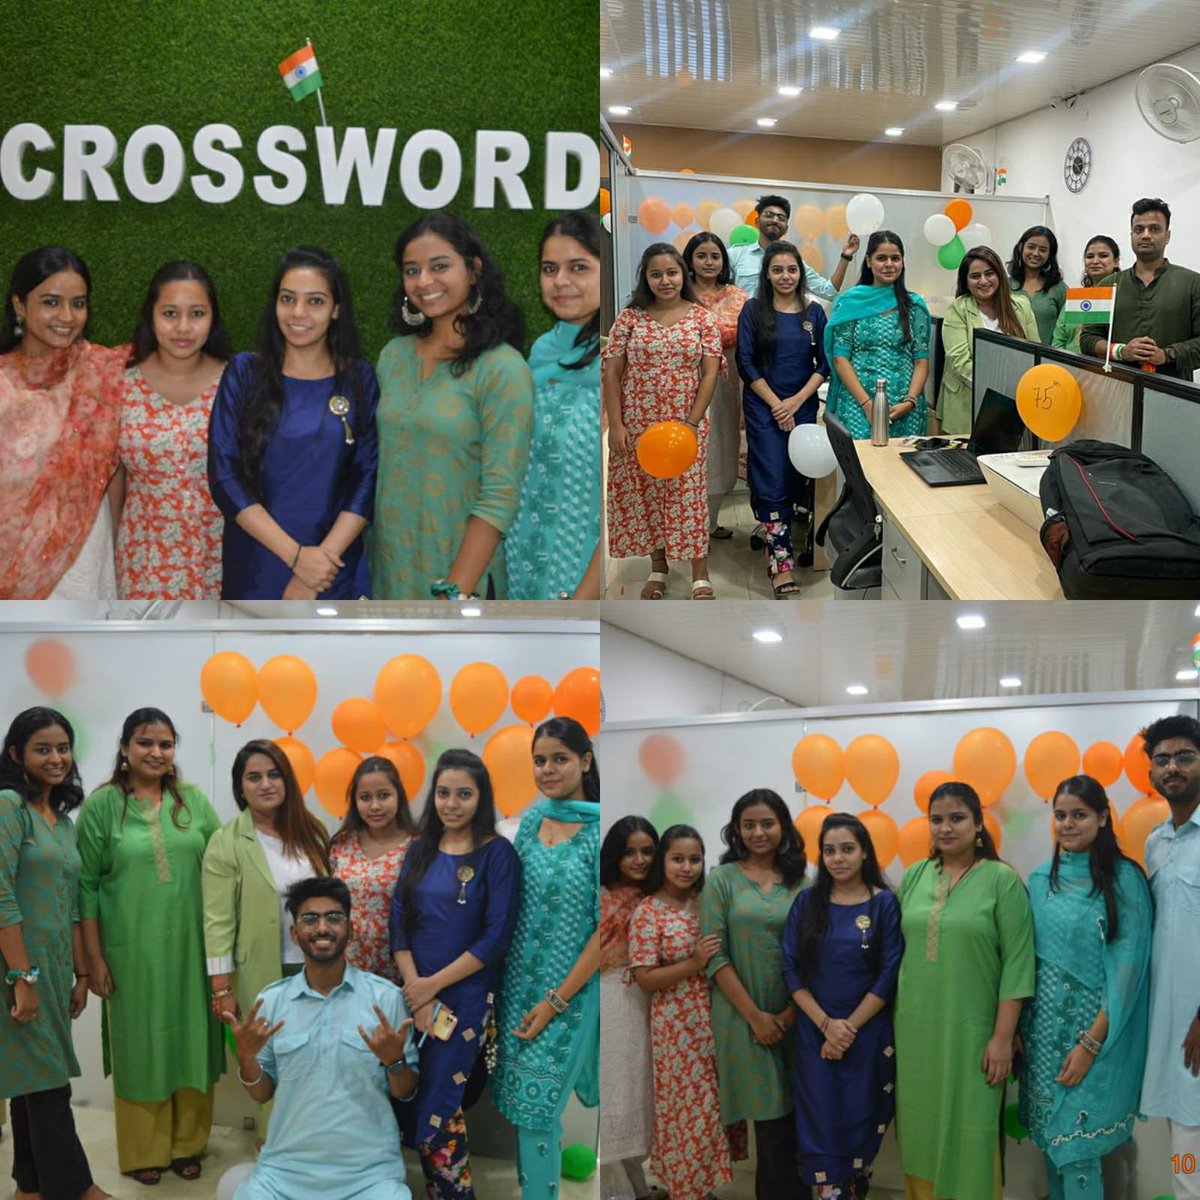 It feels like a family when we celebrate every festival with our team. #teamcrossword 
.
.
.
.
.
#team #independencedaycelebration #teamlove #independenceday #crossword #crosswordpr #teamcelebration #celebration #love #countrylove #teamwork #crosswordteam